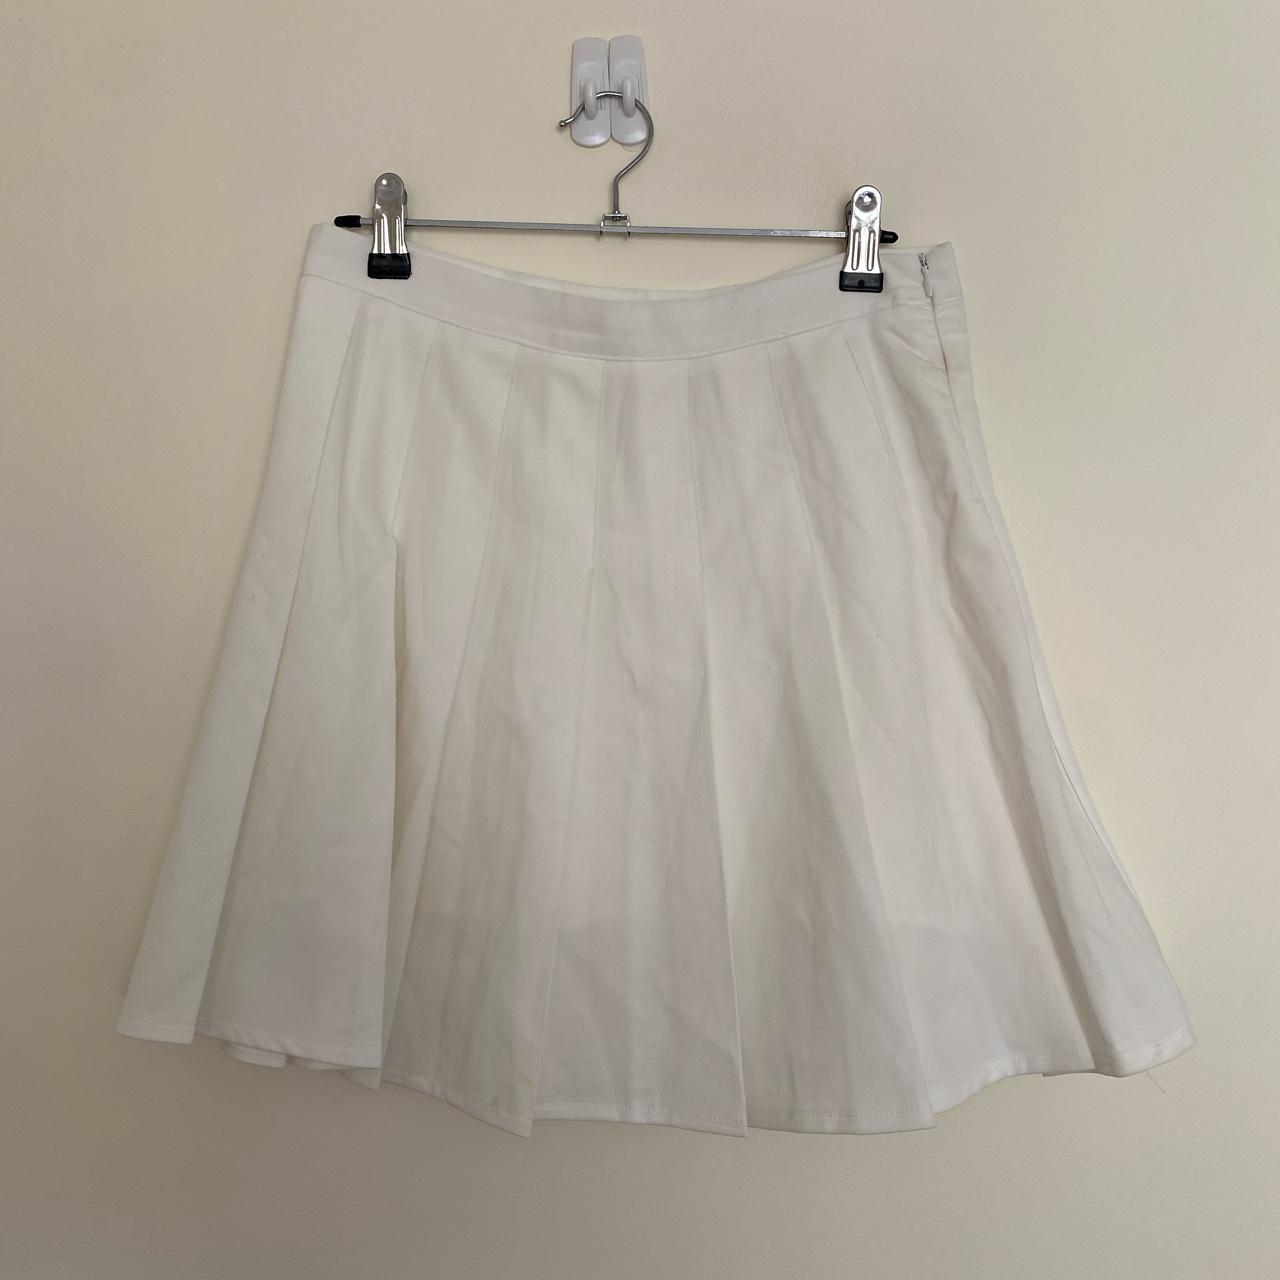 Luck & Trouble pleated tennis skirt white Size... - Depop